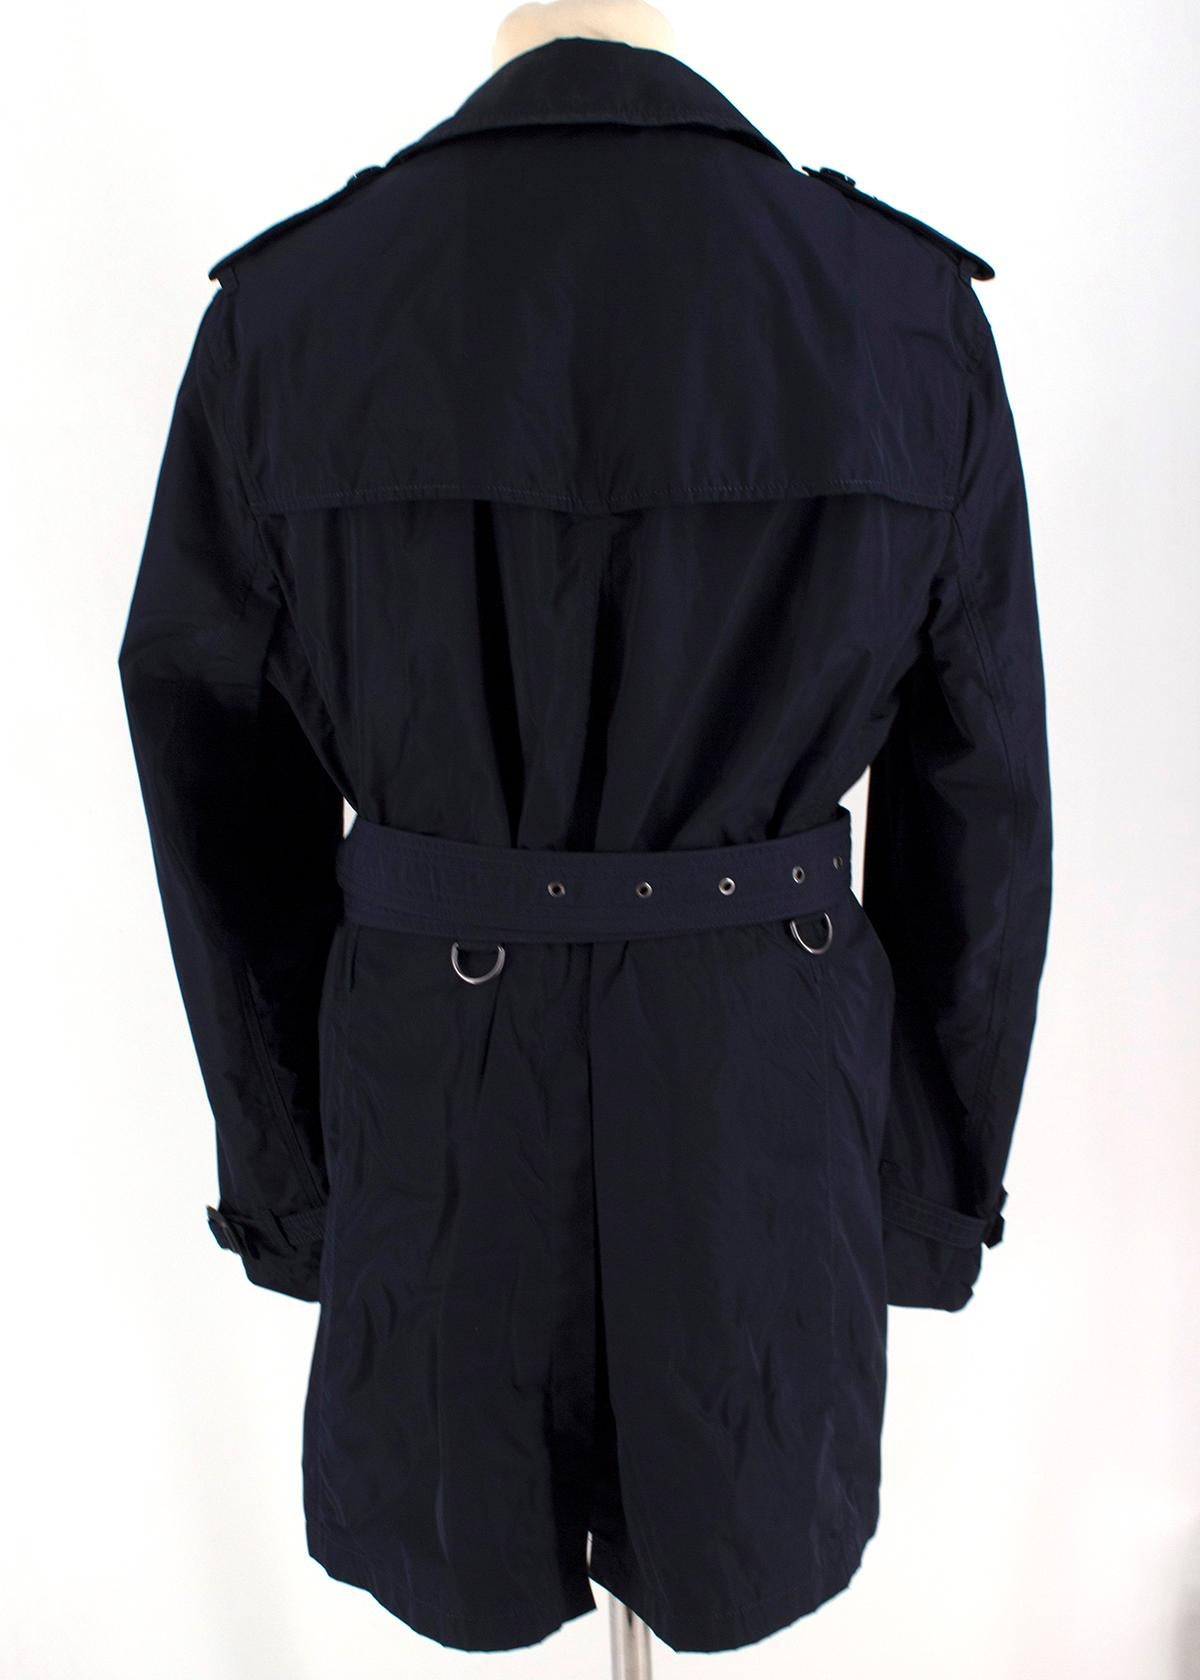 Black Burberry Navy Belted Trench Coat SIZE XL